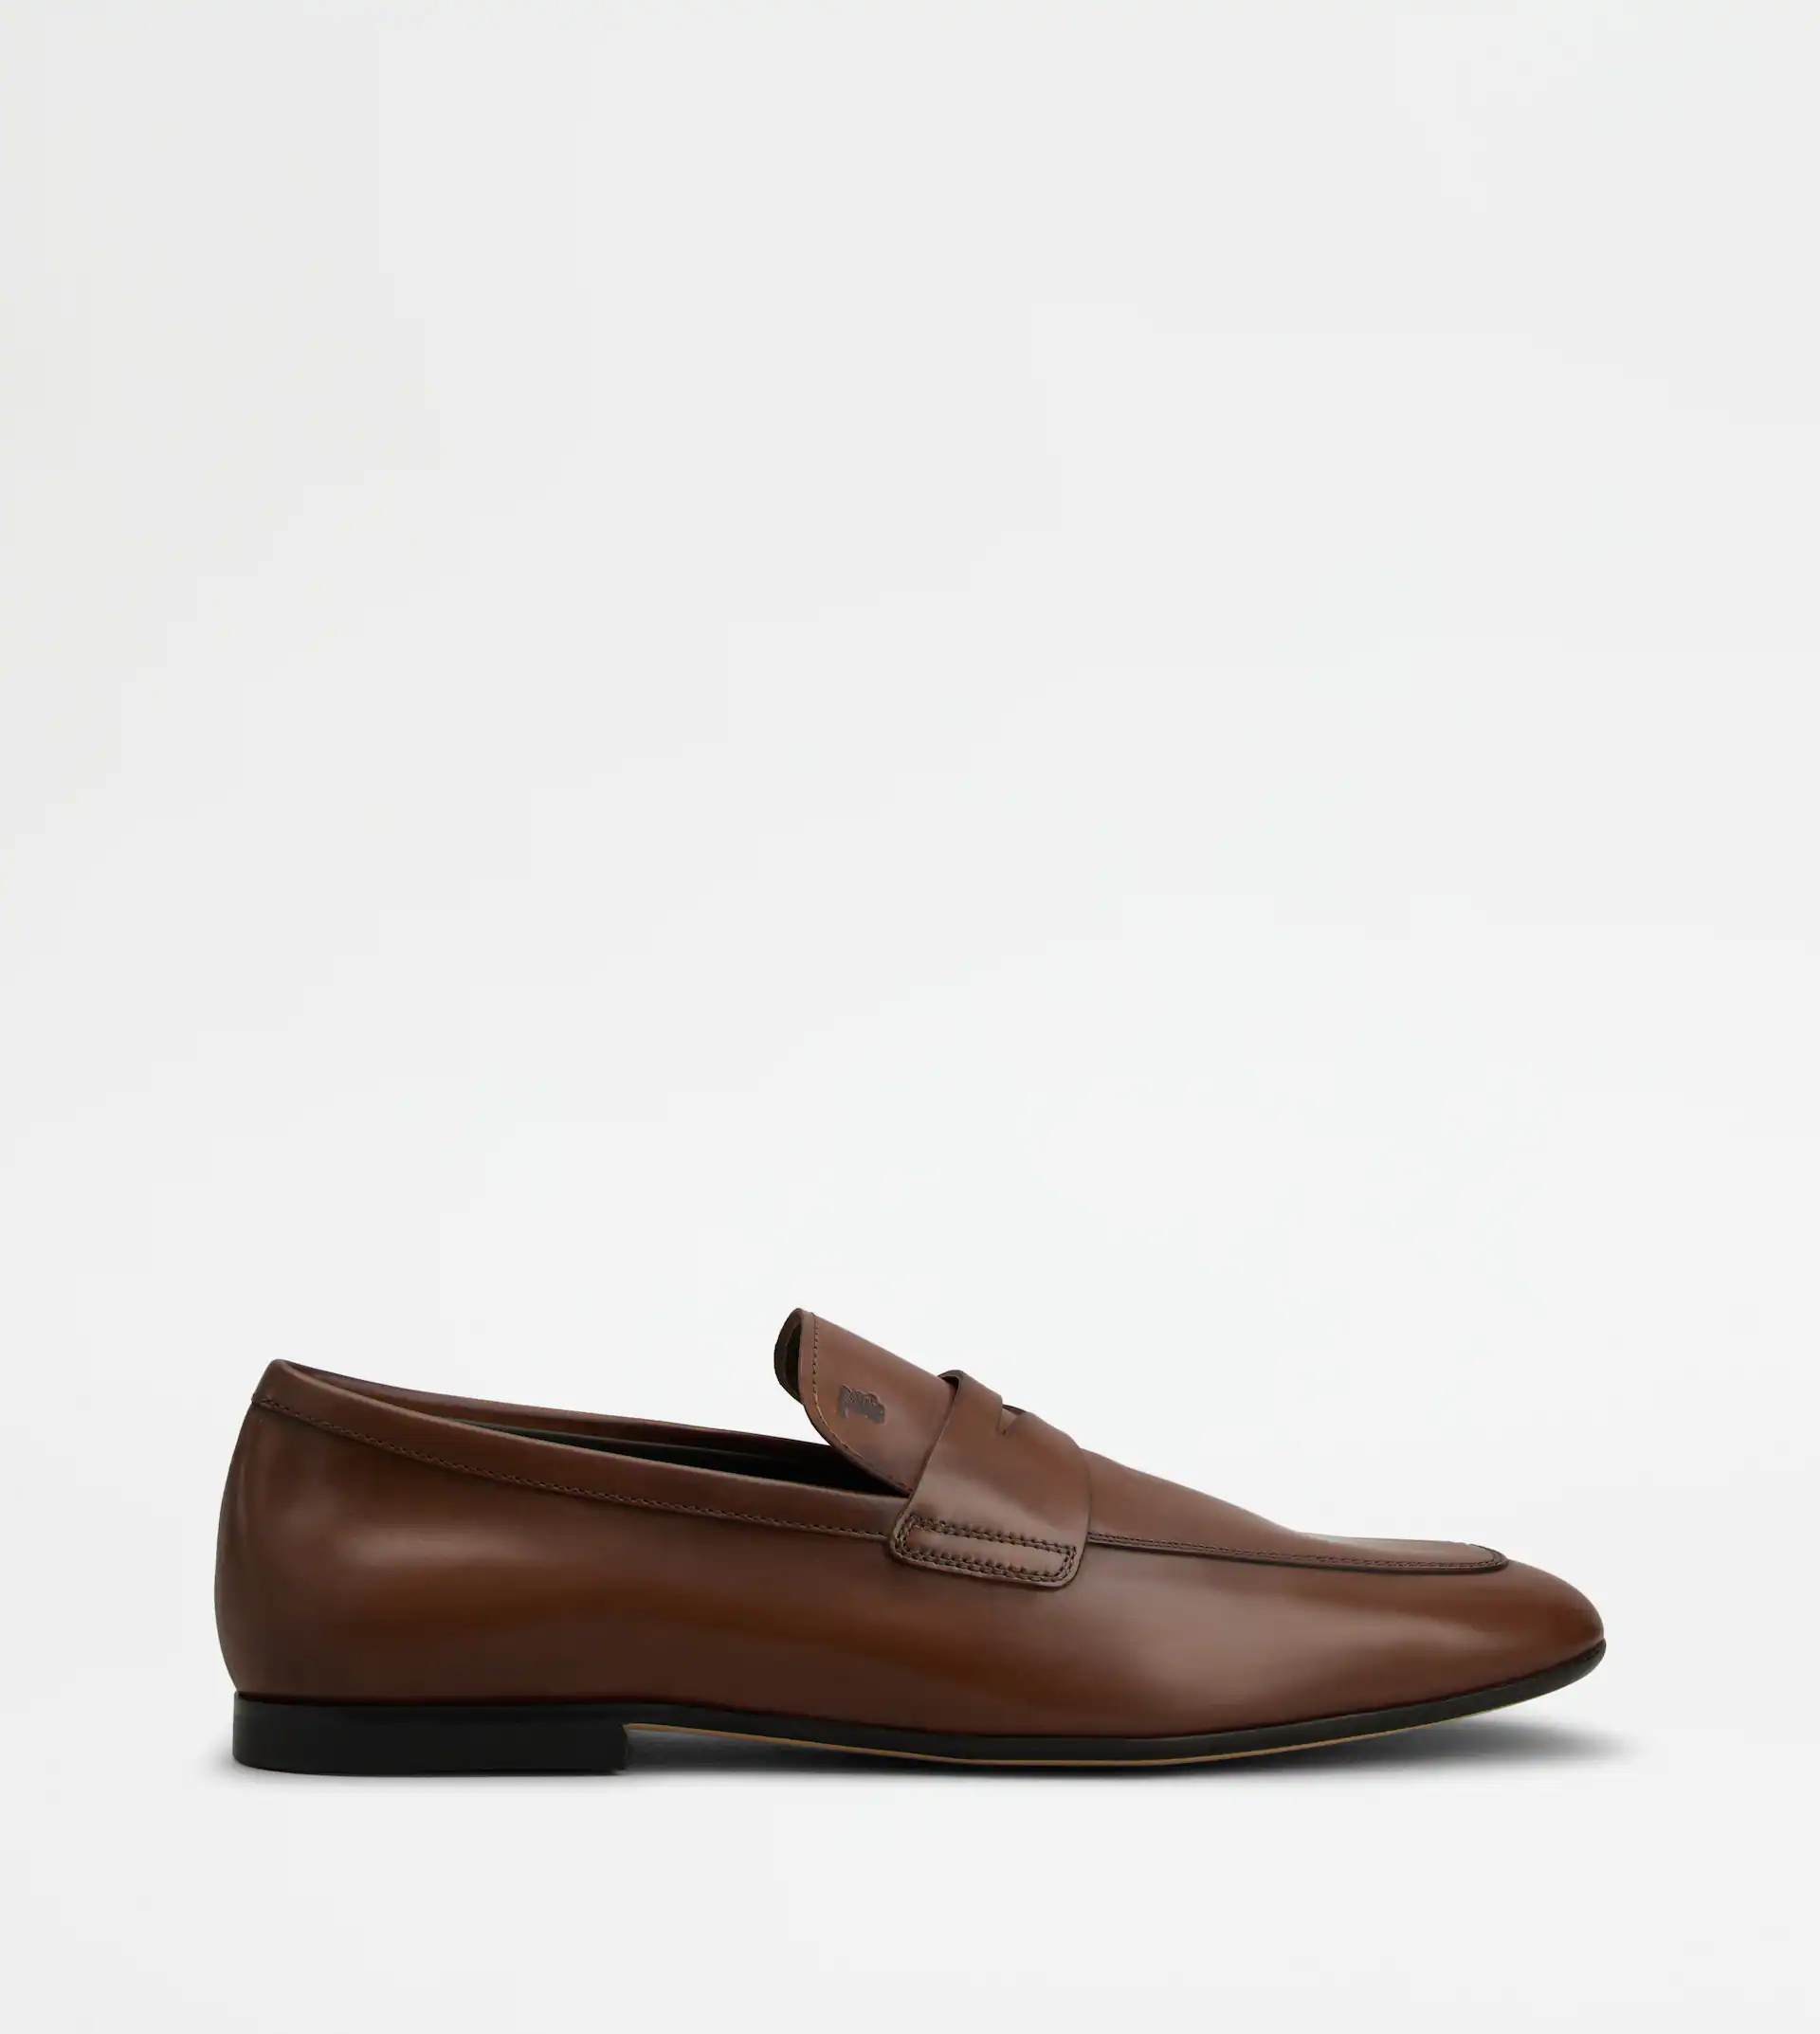 TOD'S LOAFERS IN LEATHER - BROWN - 1